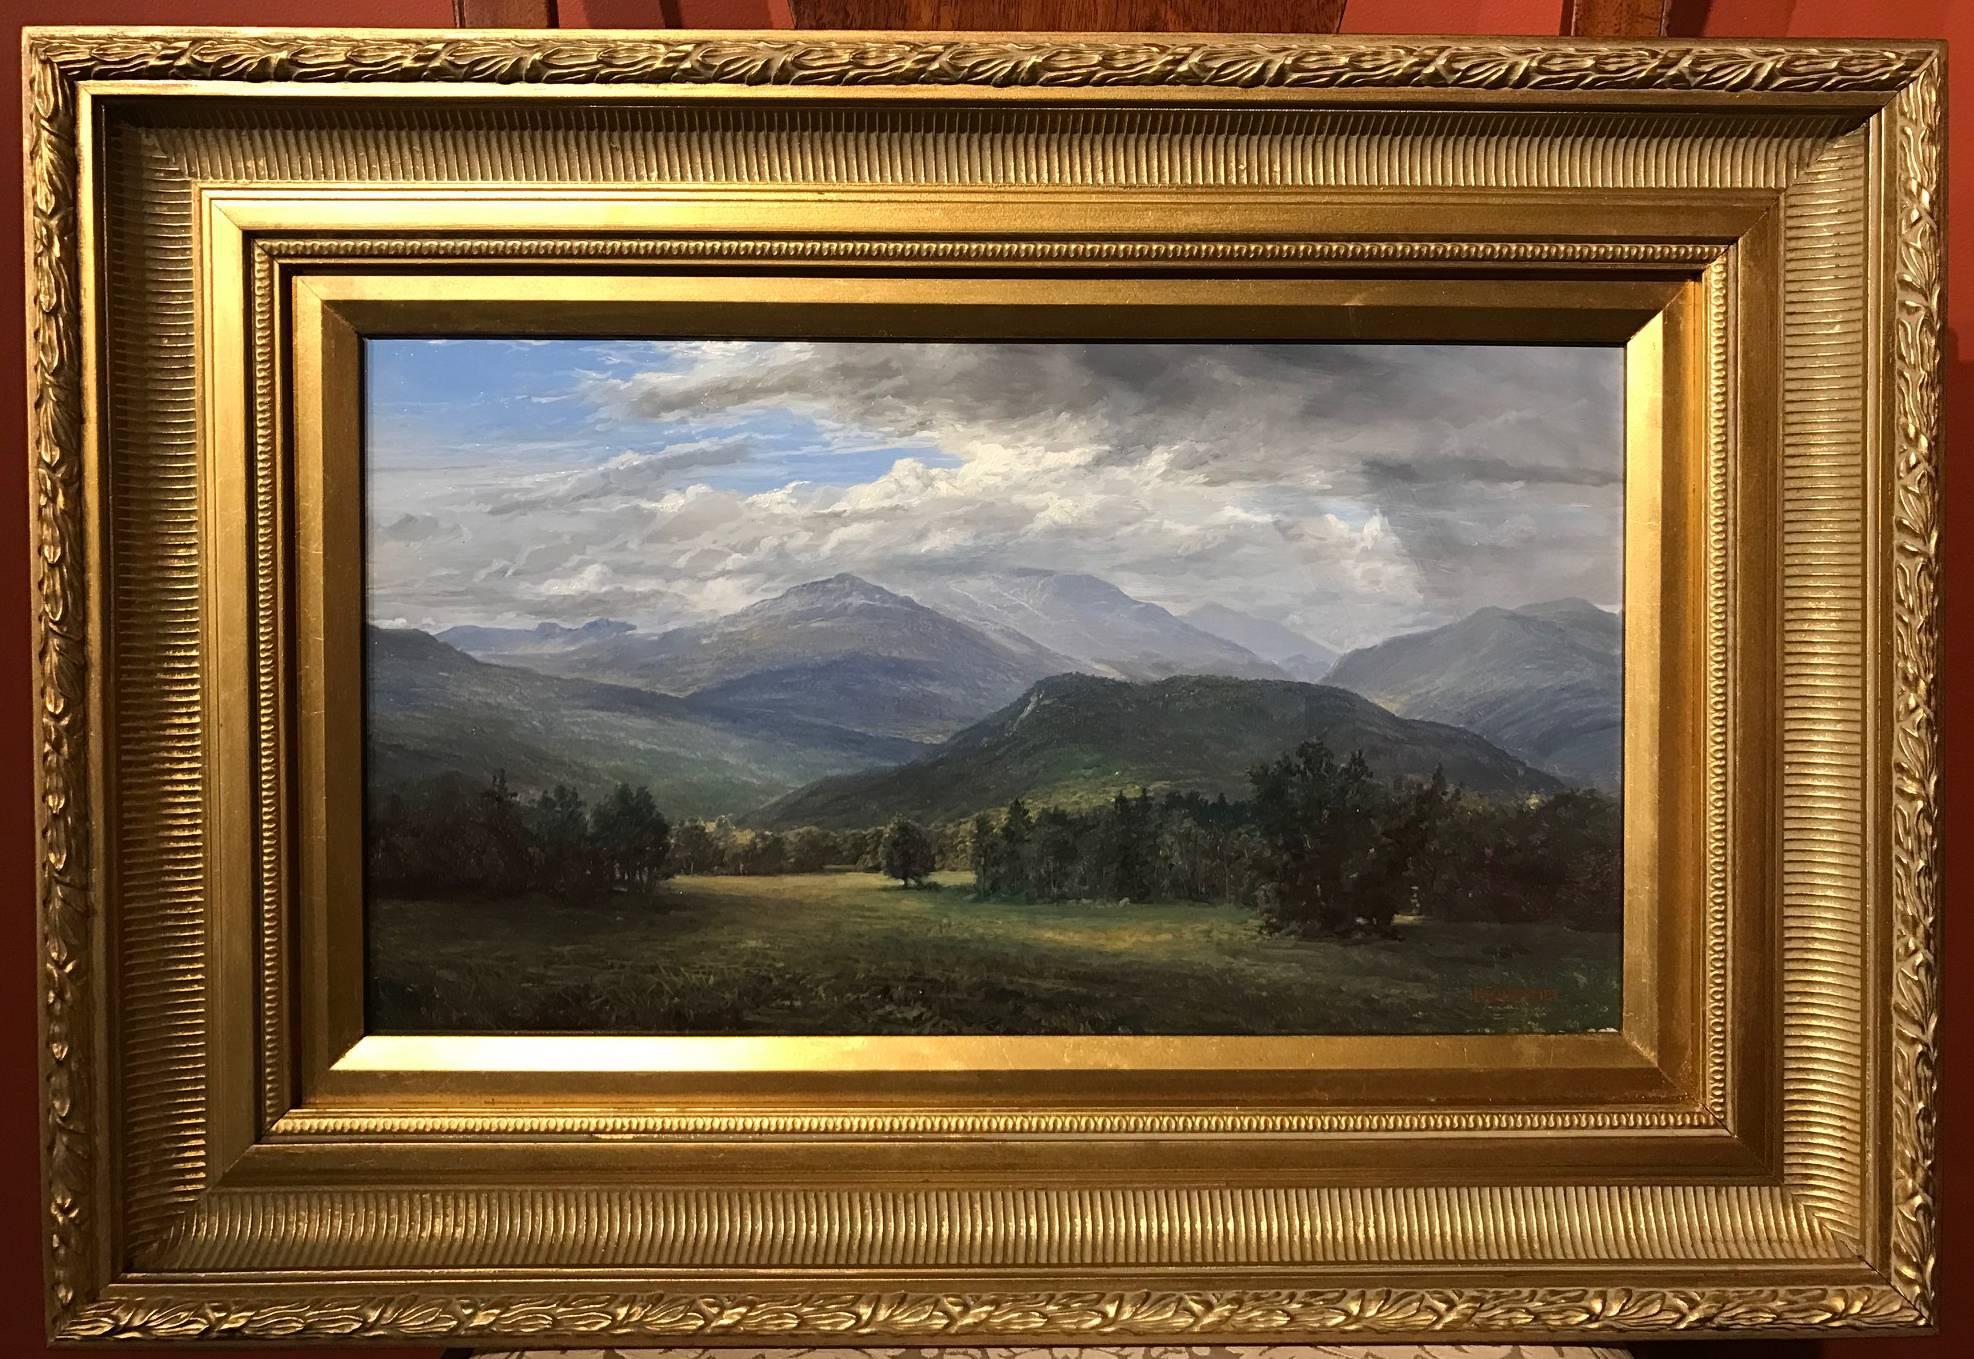 This beautiful New Hampshire White Mountain landscape painting of Mount Washington in the Presidential Range was done by contemporary American artist Erik Koeppel (1980-). Koeppel was born in Oregon and later moved to the White Mountains of New